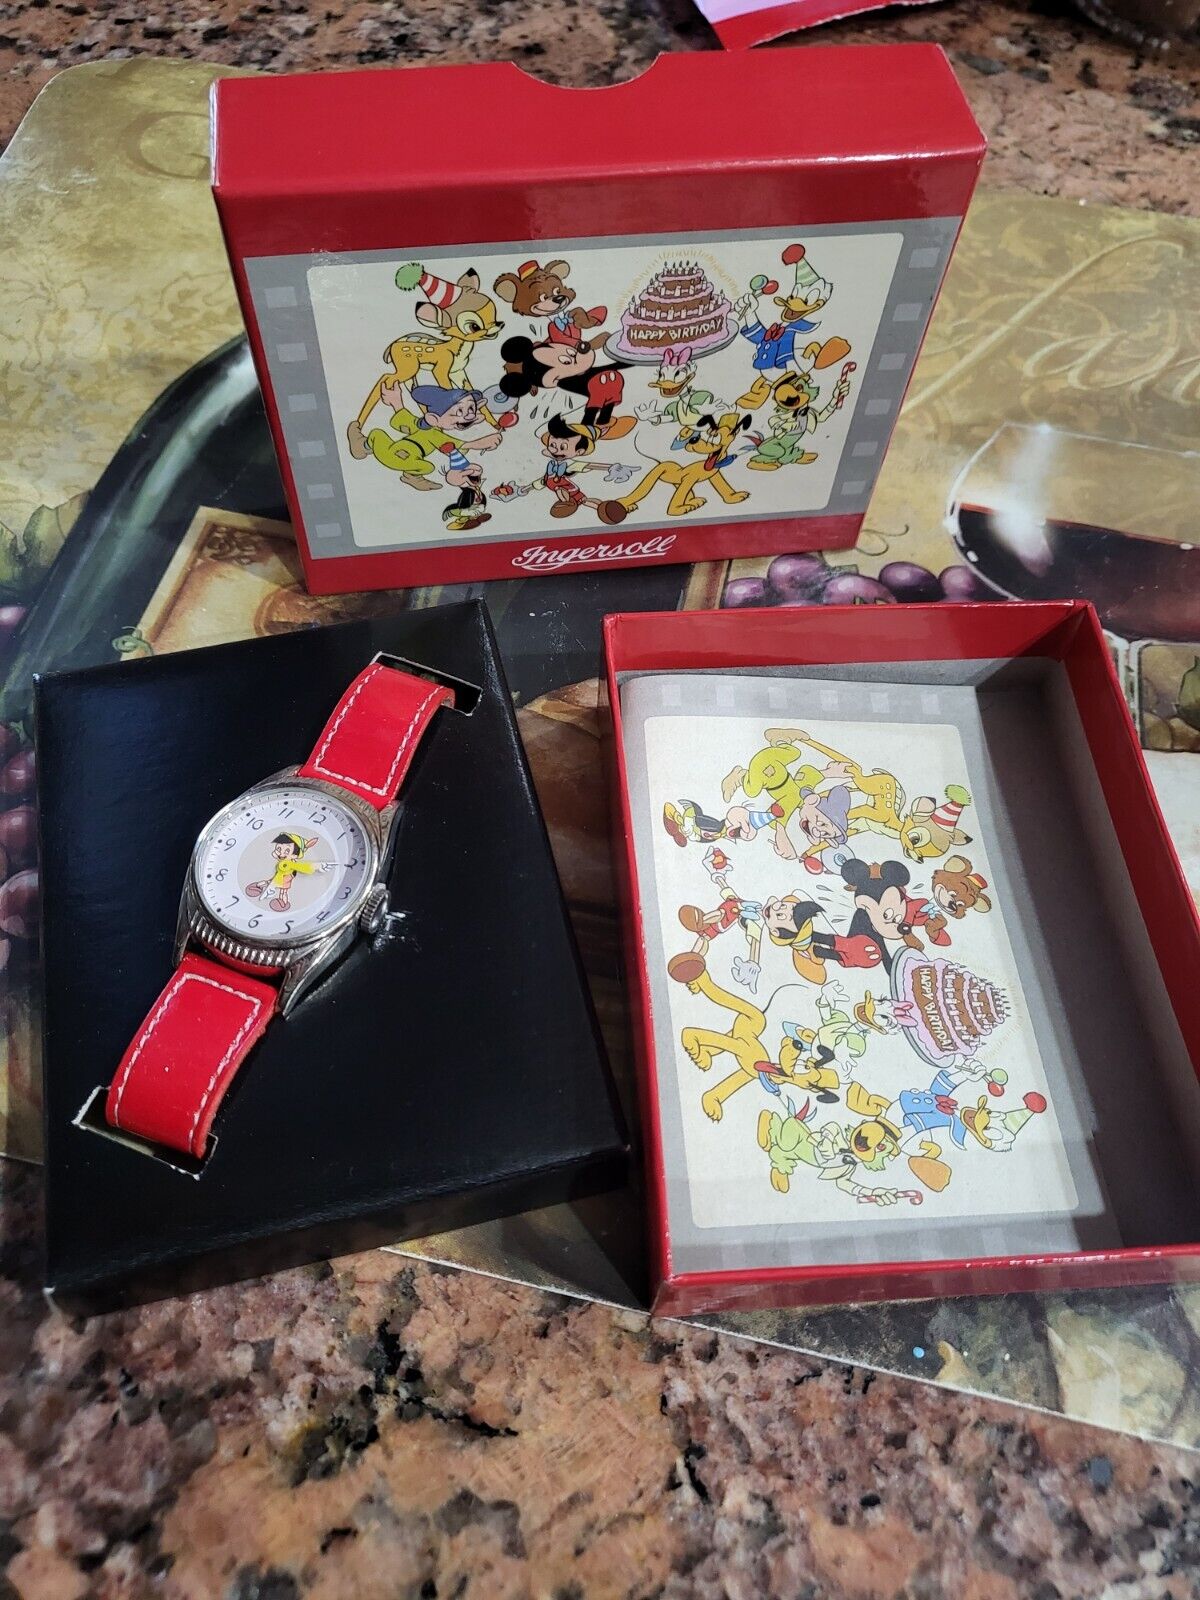 Rare Ingersoll Pinocchio silver limited edition watch 0097 of 2000